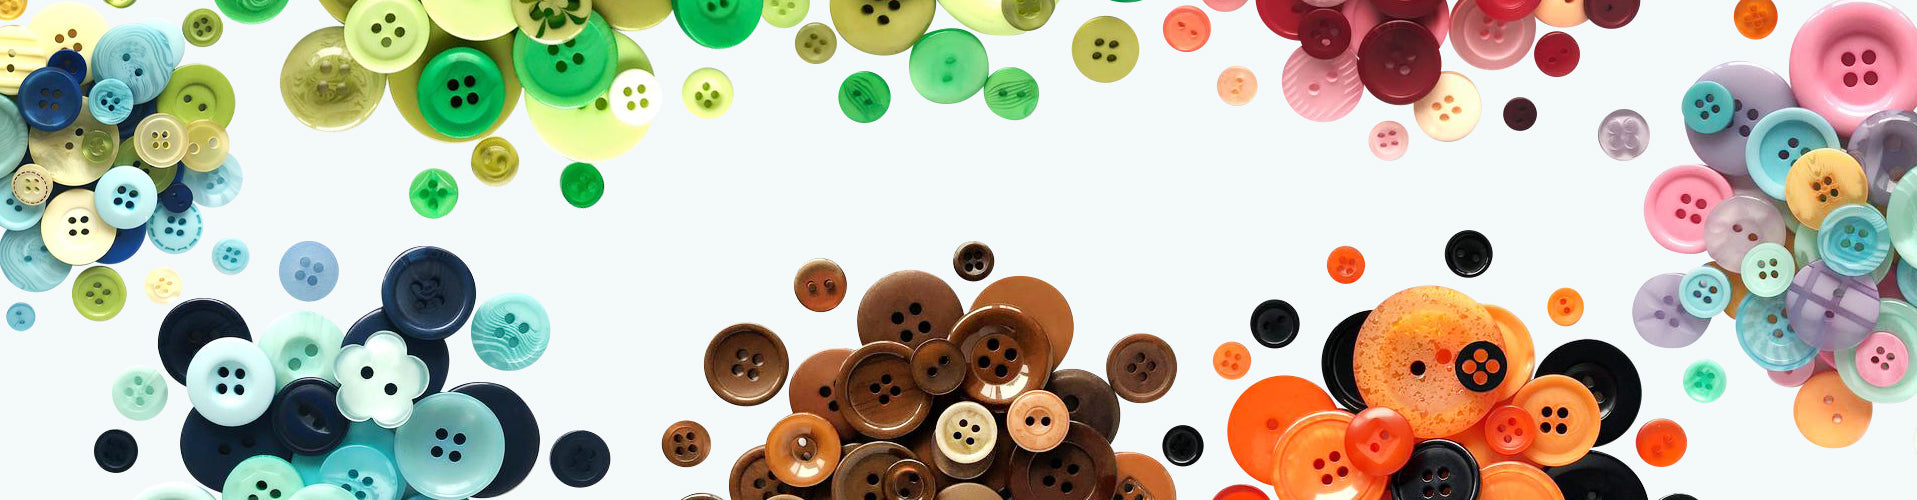 Button Bonanza Craft & Sewing Buttons | Buttons Galore and More